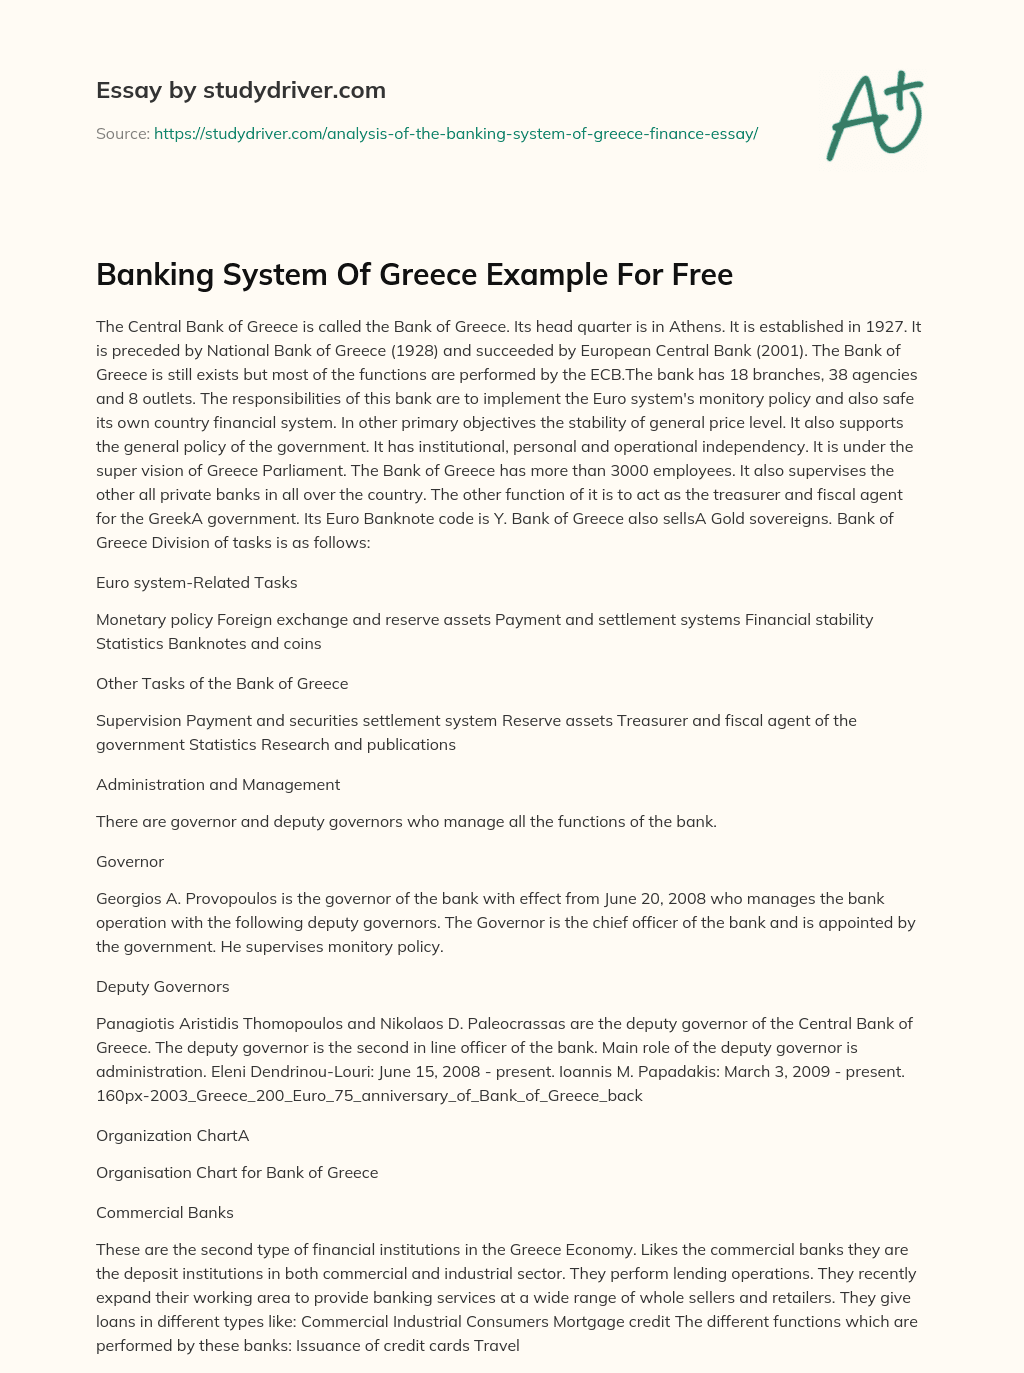 Banking System of Greece Example for Free essay